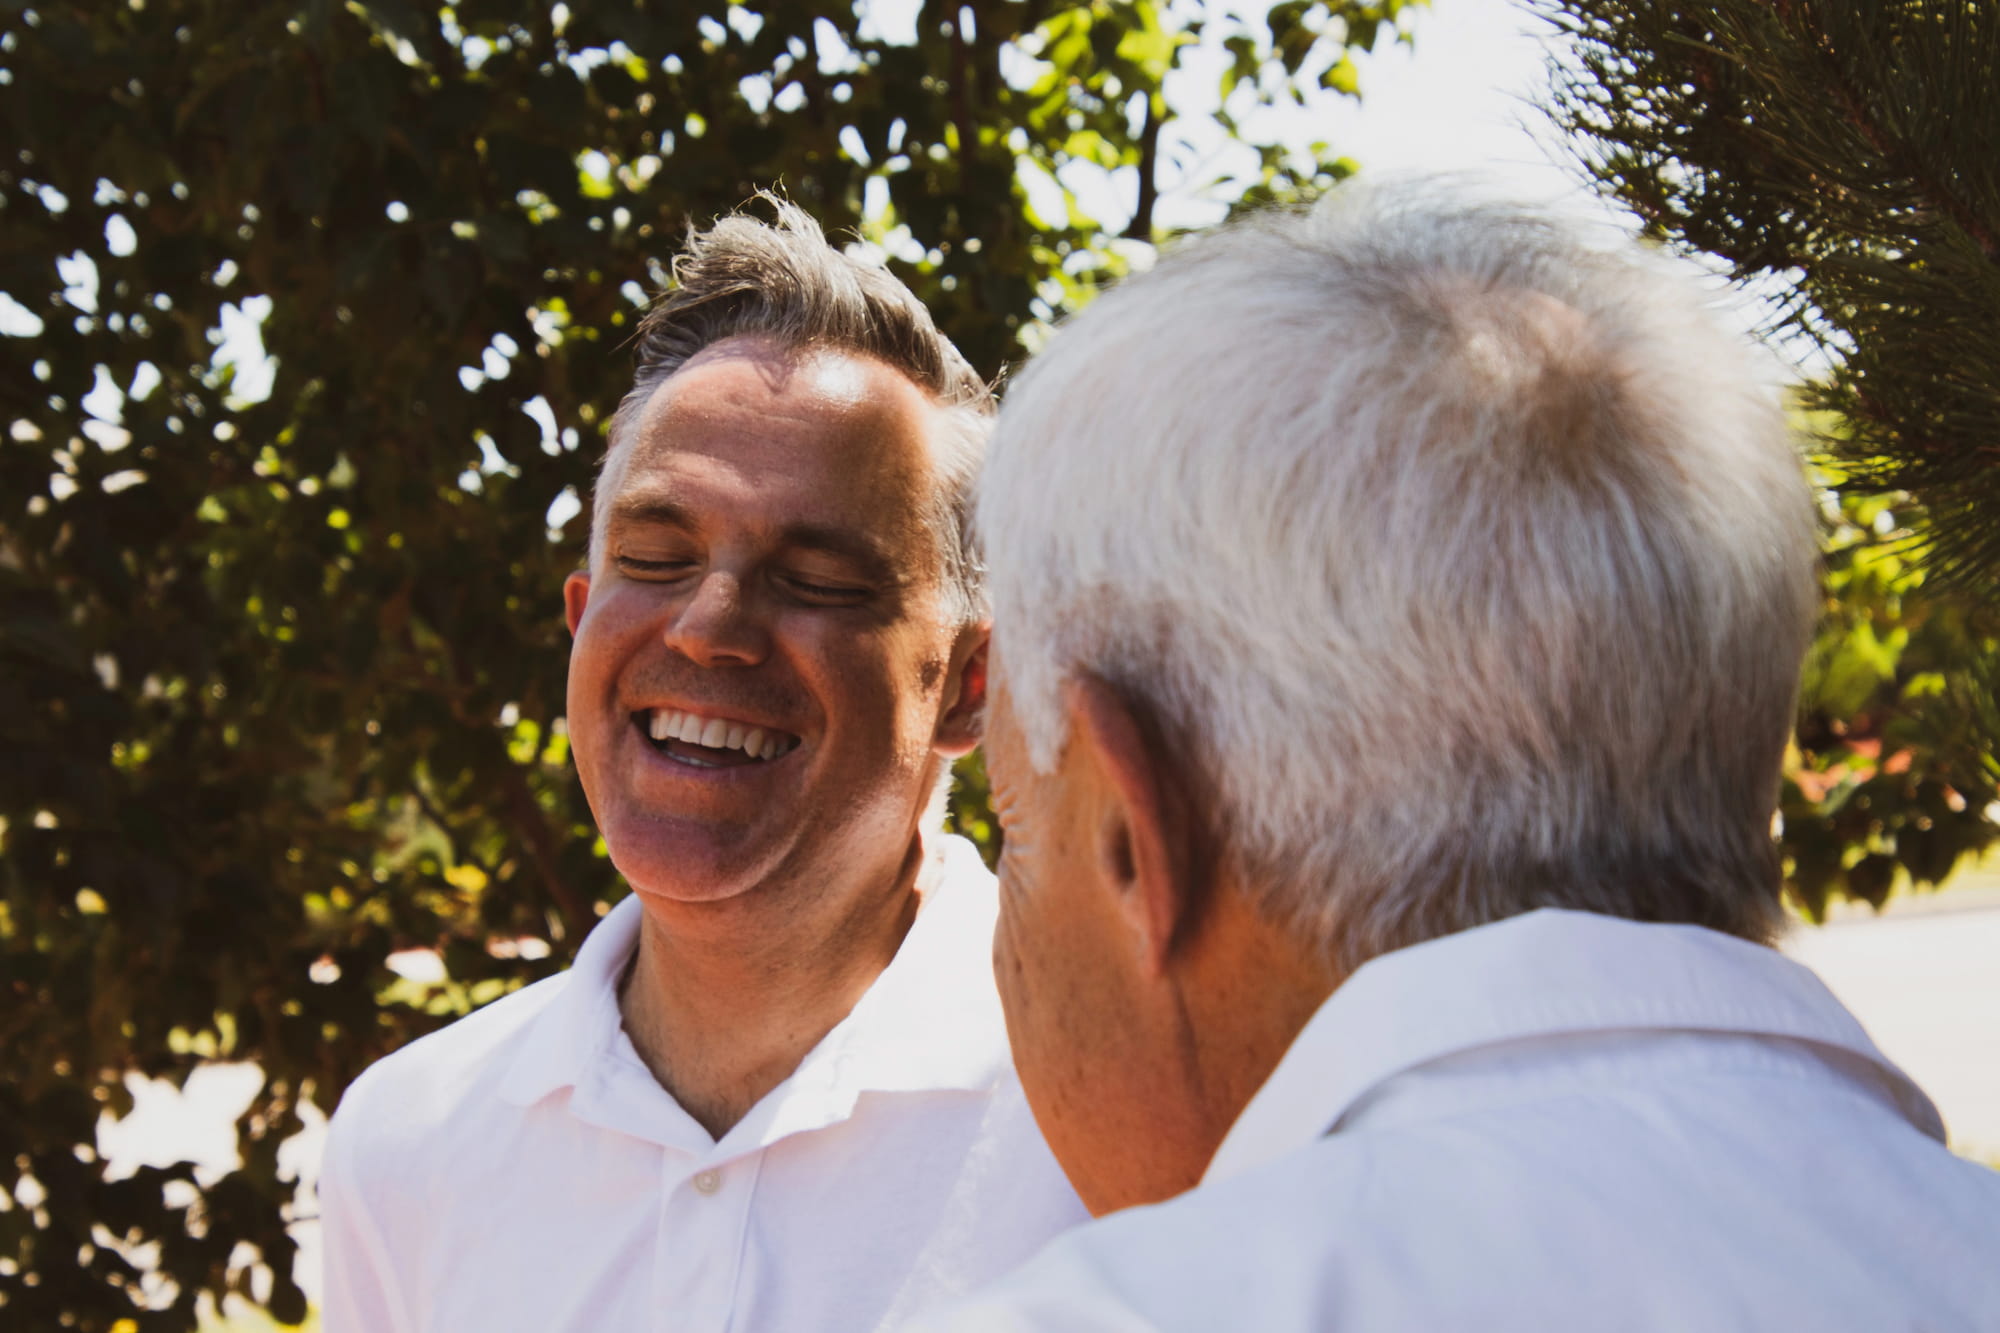 An elderly father and middle-age son laughing together outside.